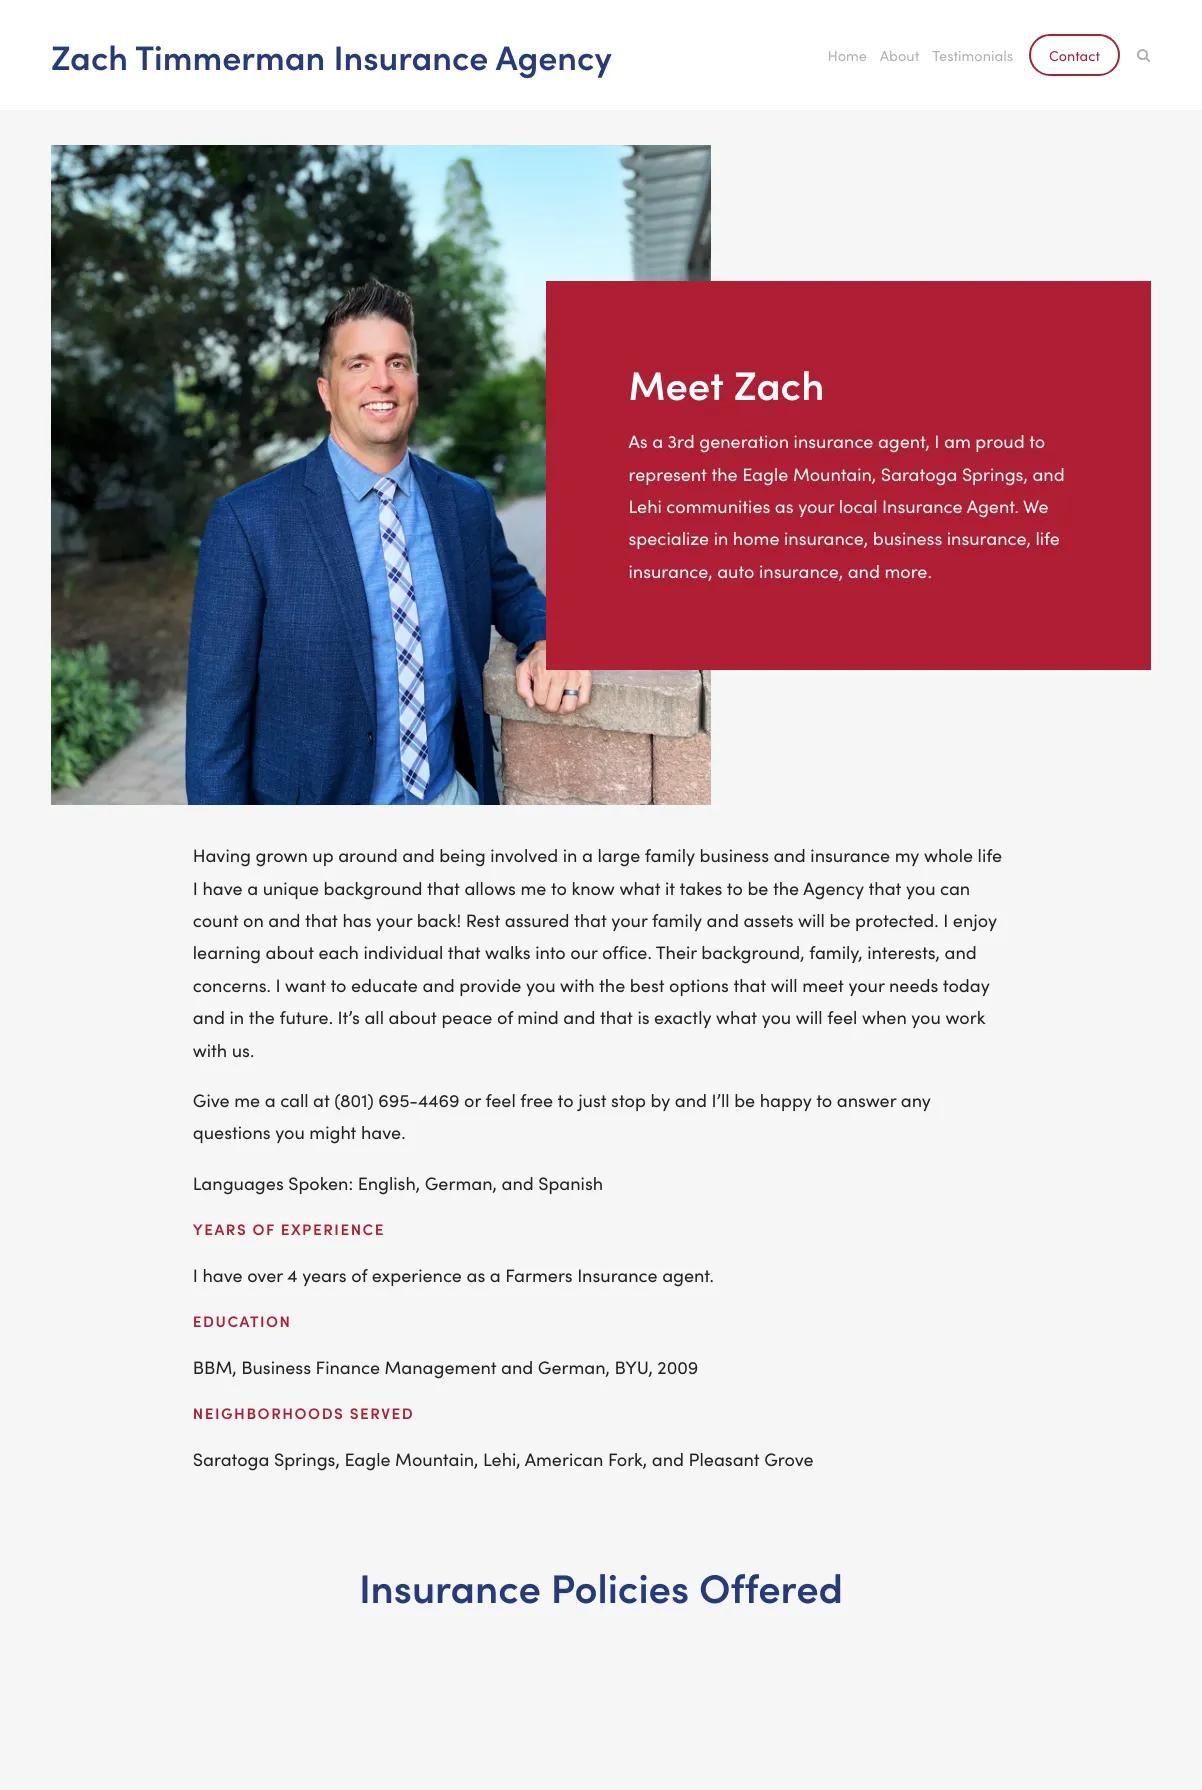 Screenshot 2 of Zach Timmerman Insurance Agency (Example Squarespace Insurance Agent Website)